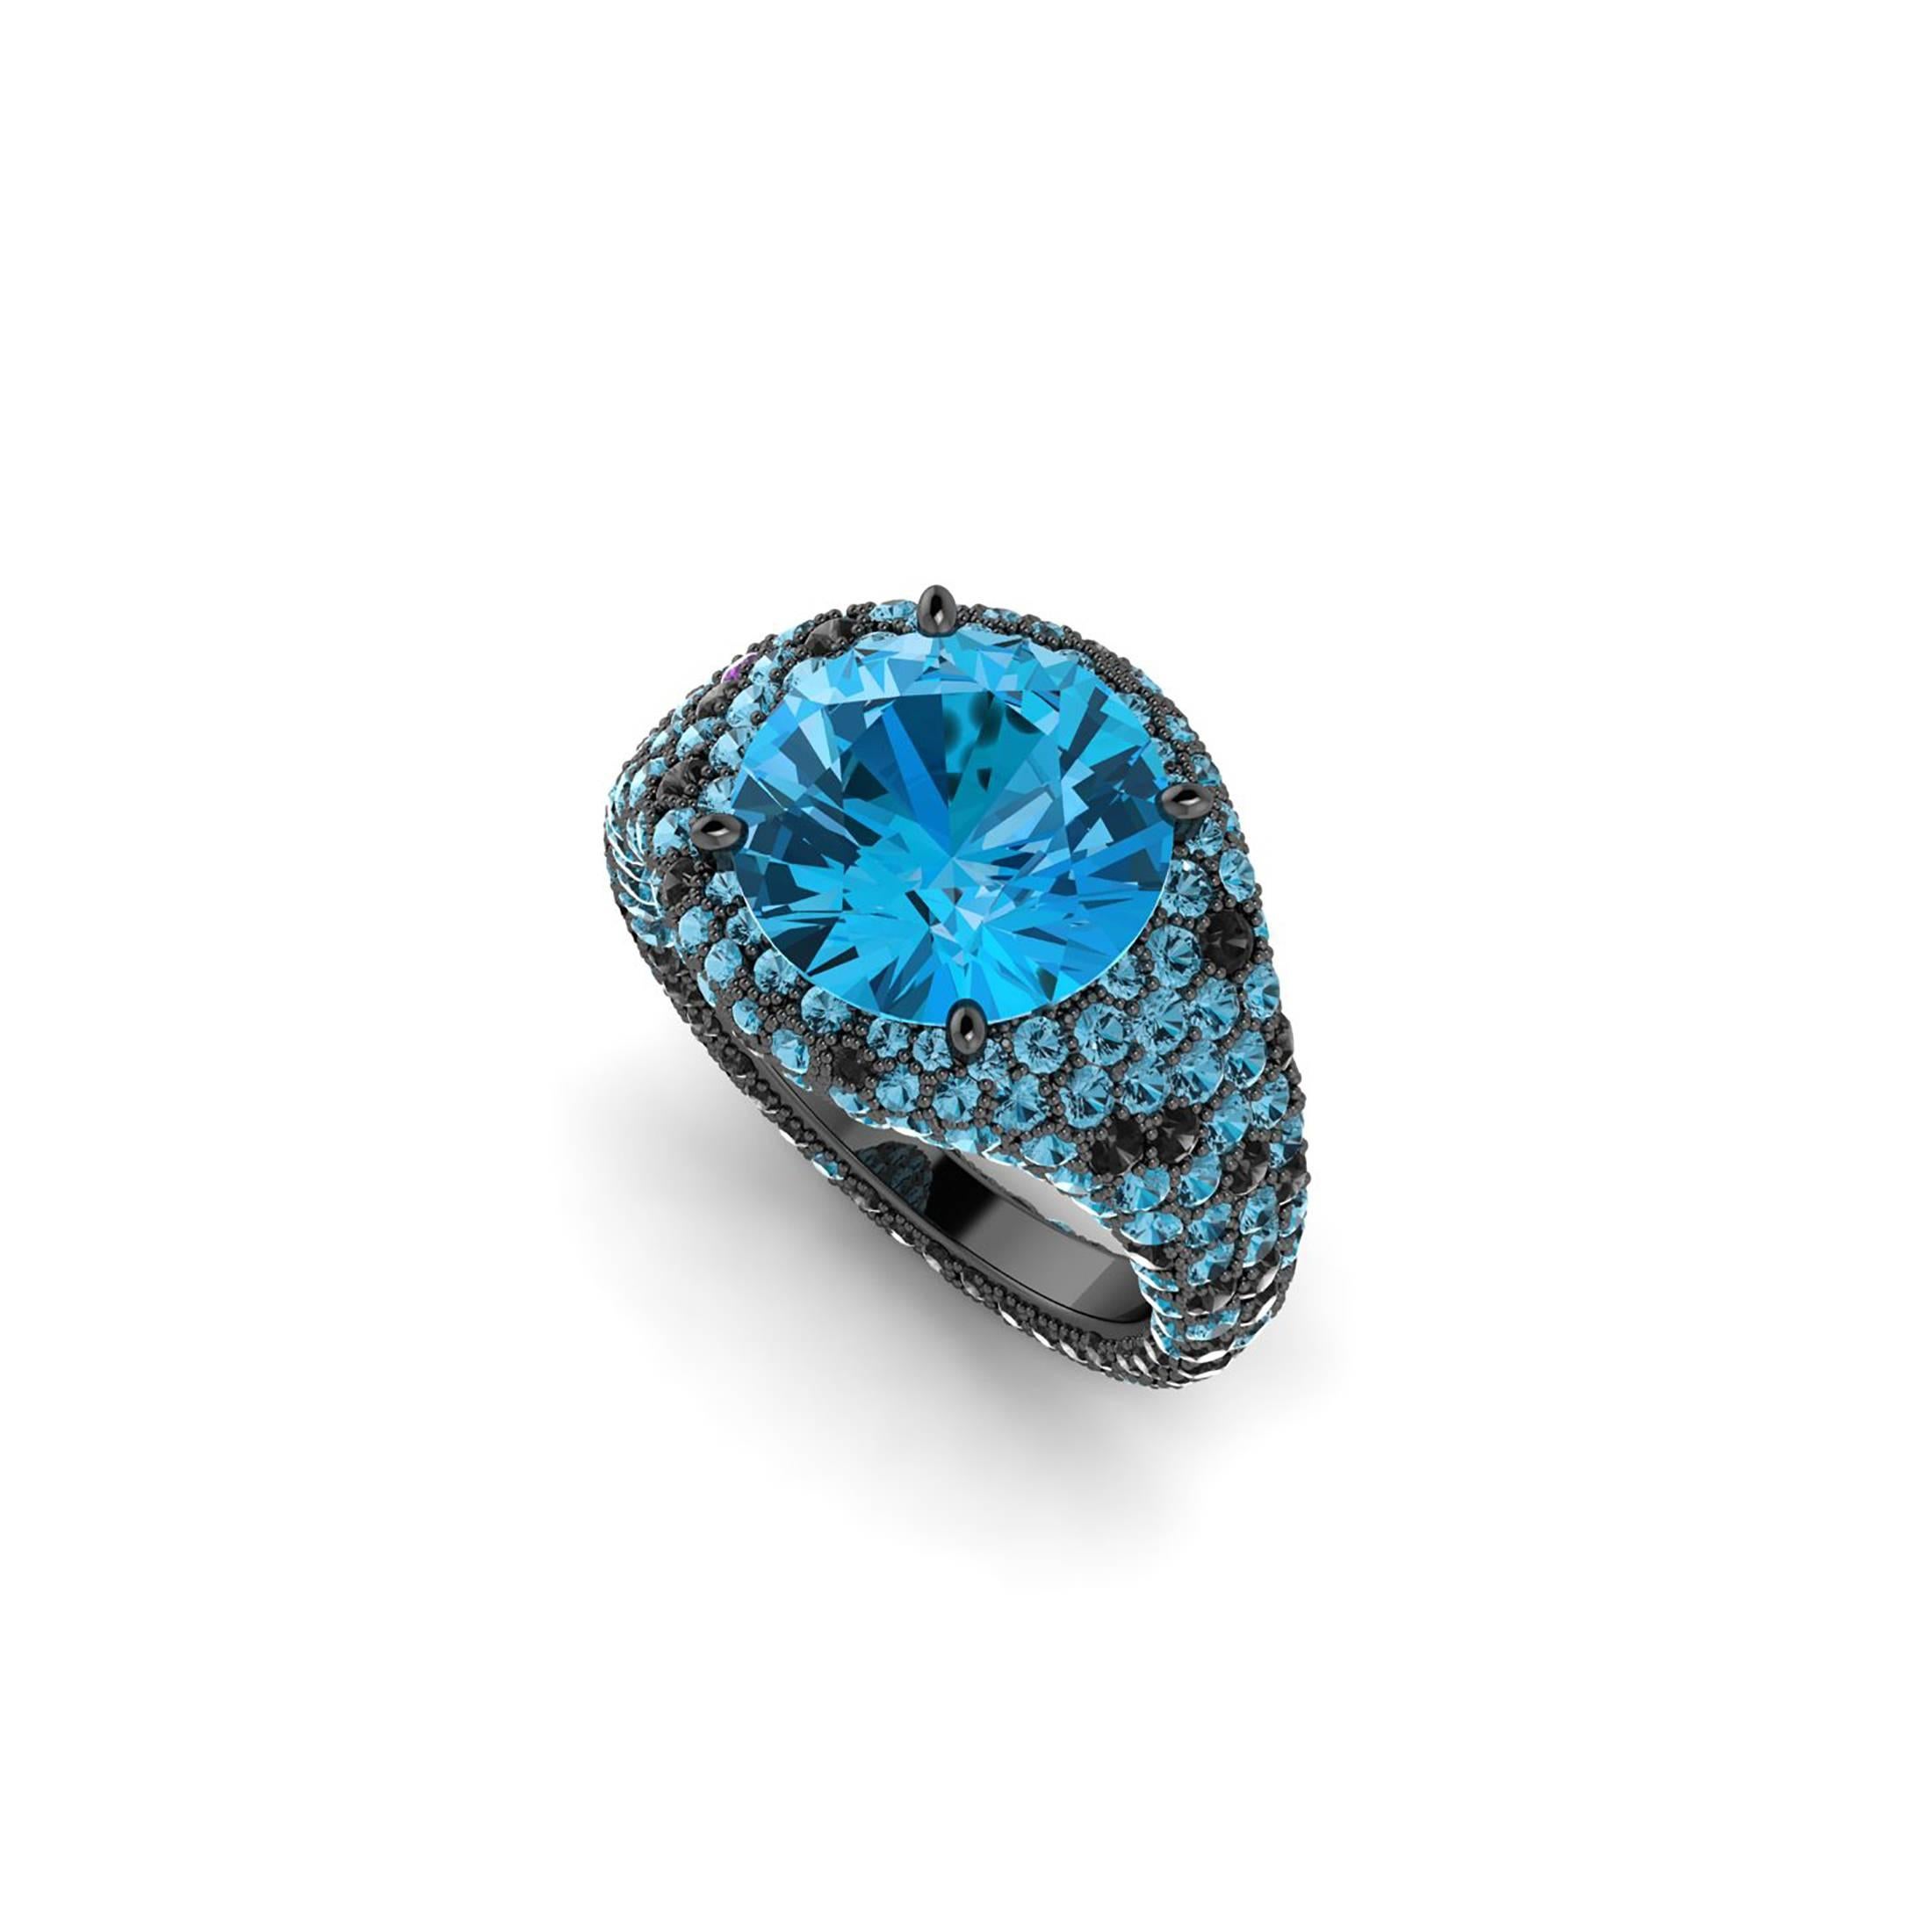 from FERRUCCI, approximately 4.50 carats intense blue round cut Topaz, adorned by approximately 2.00 carats of round blue Topaz melees pave' set and approximately 1.10 carats of round black diamonds, conceived in an 18k black gold couture